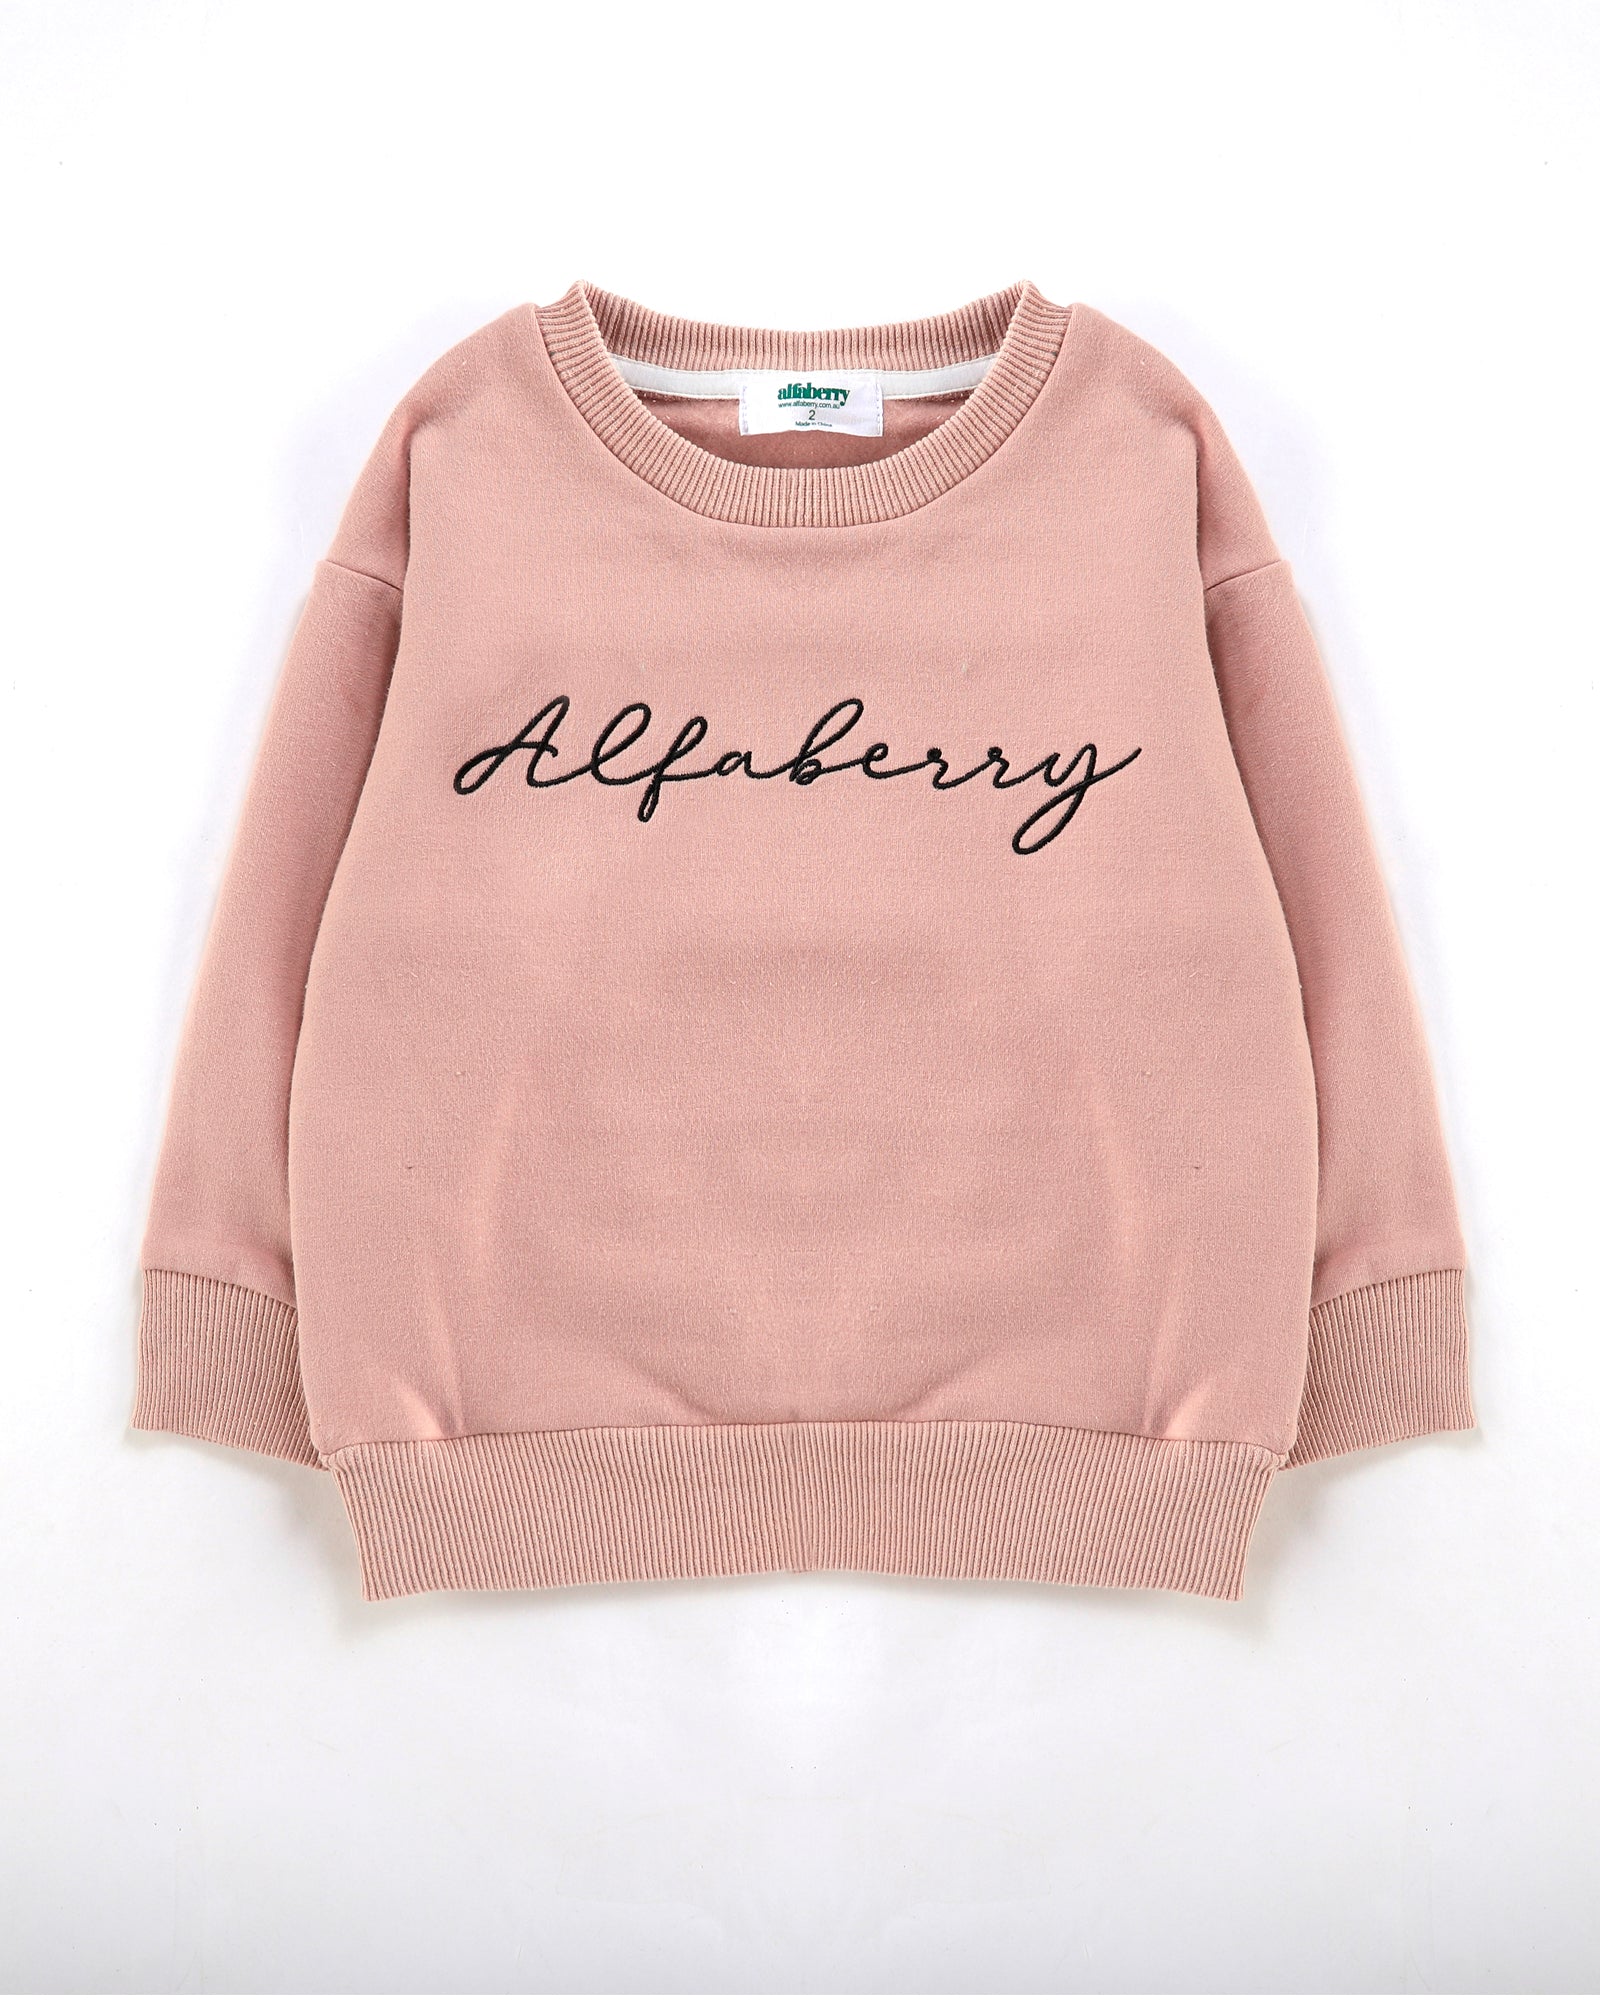 Alfaberry Signature Jumper in Dust Front